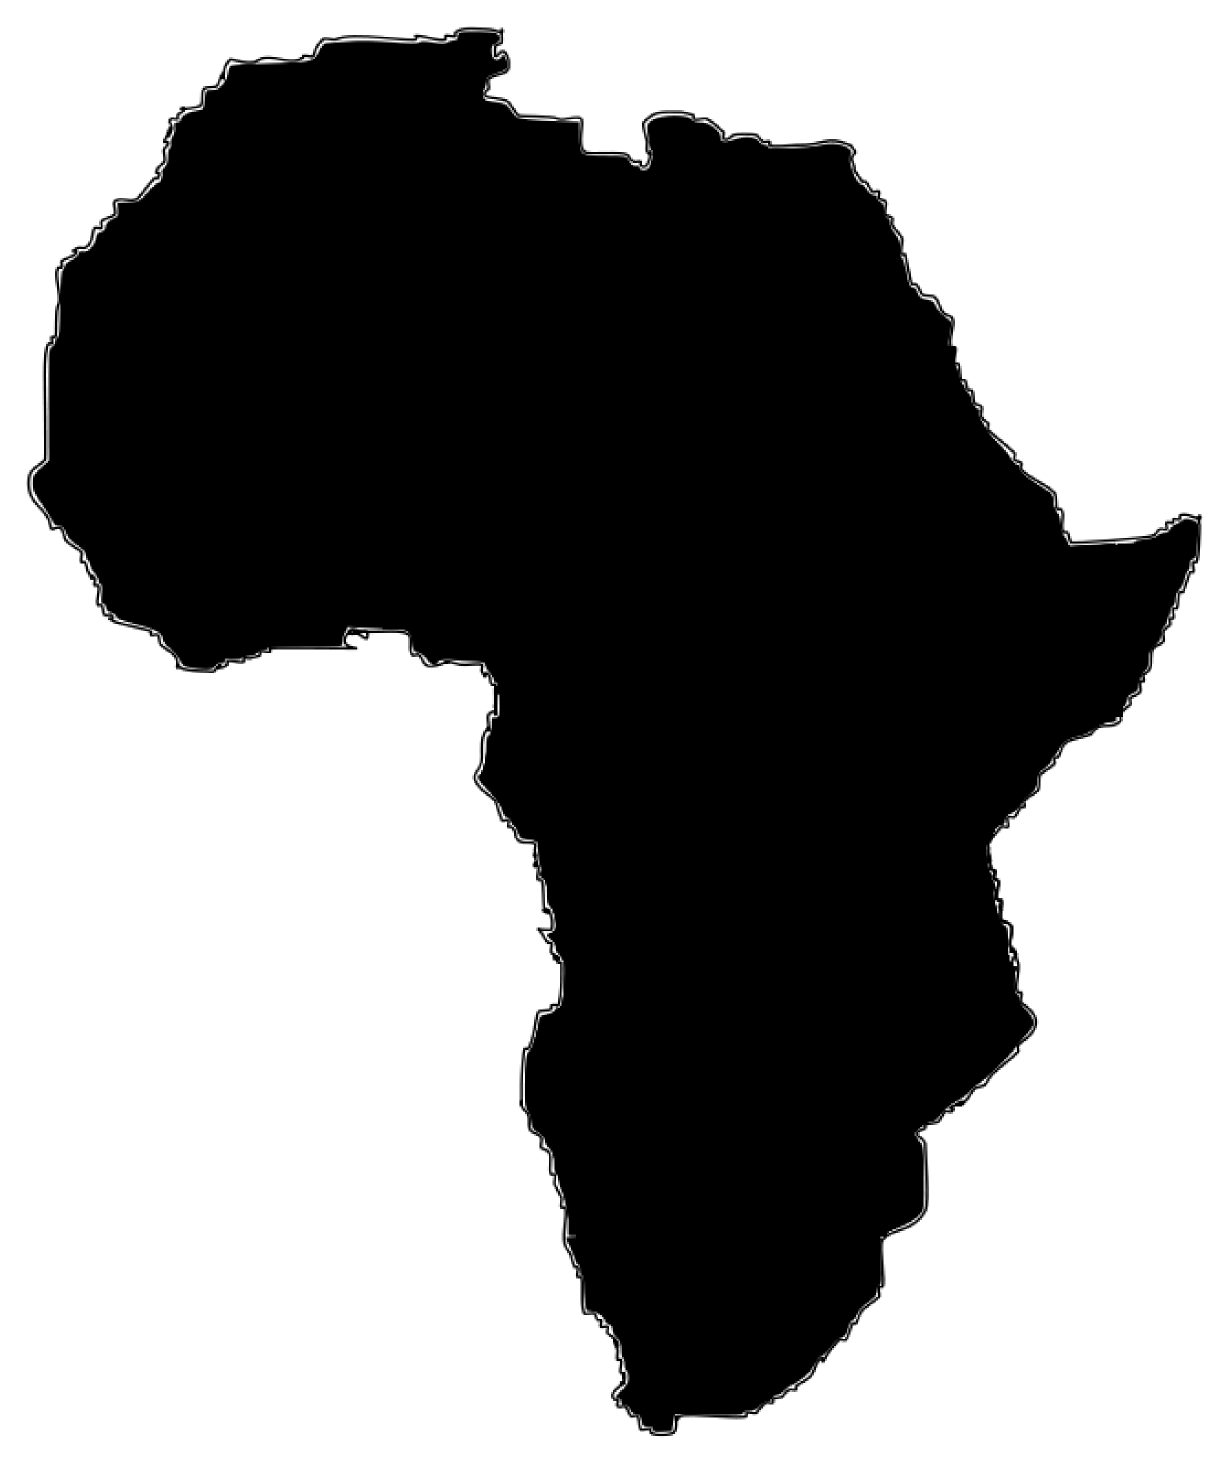 Africa map clipart png